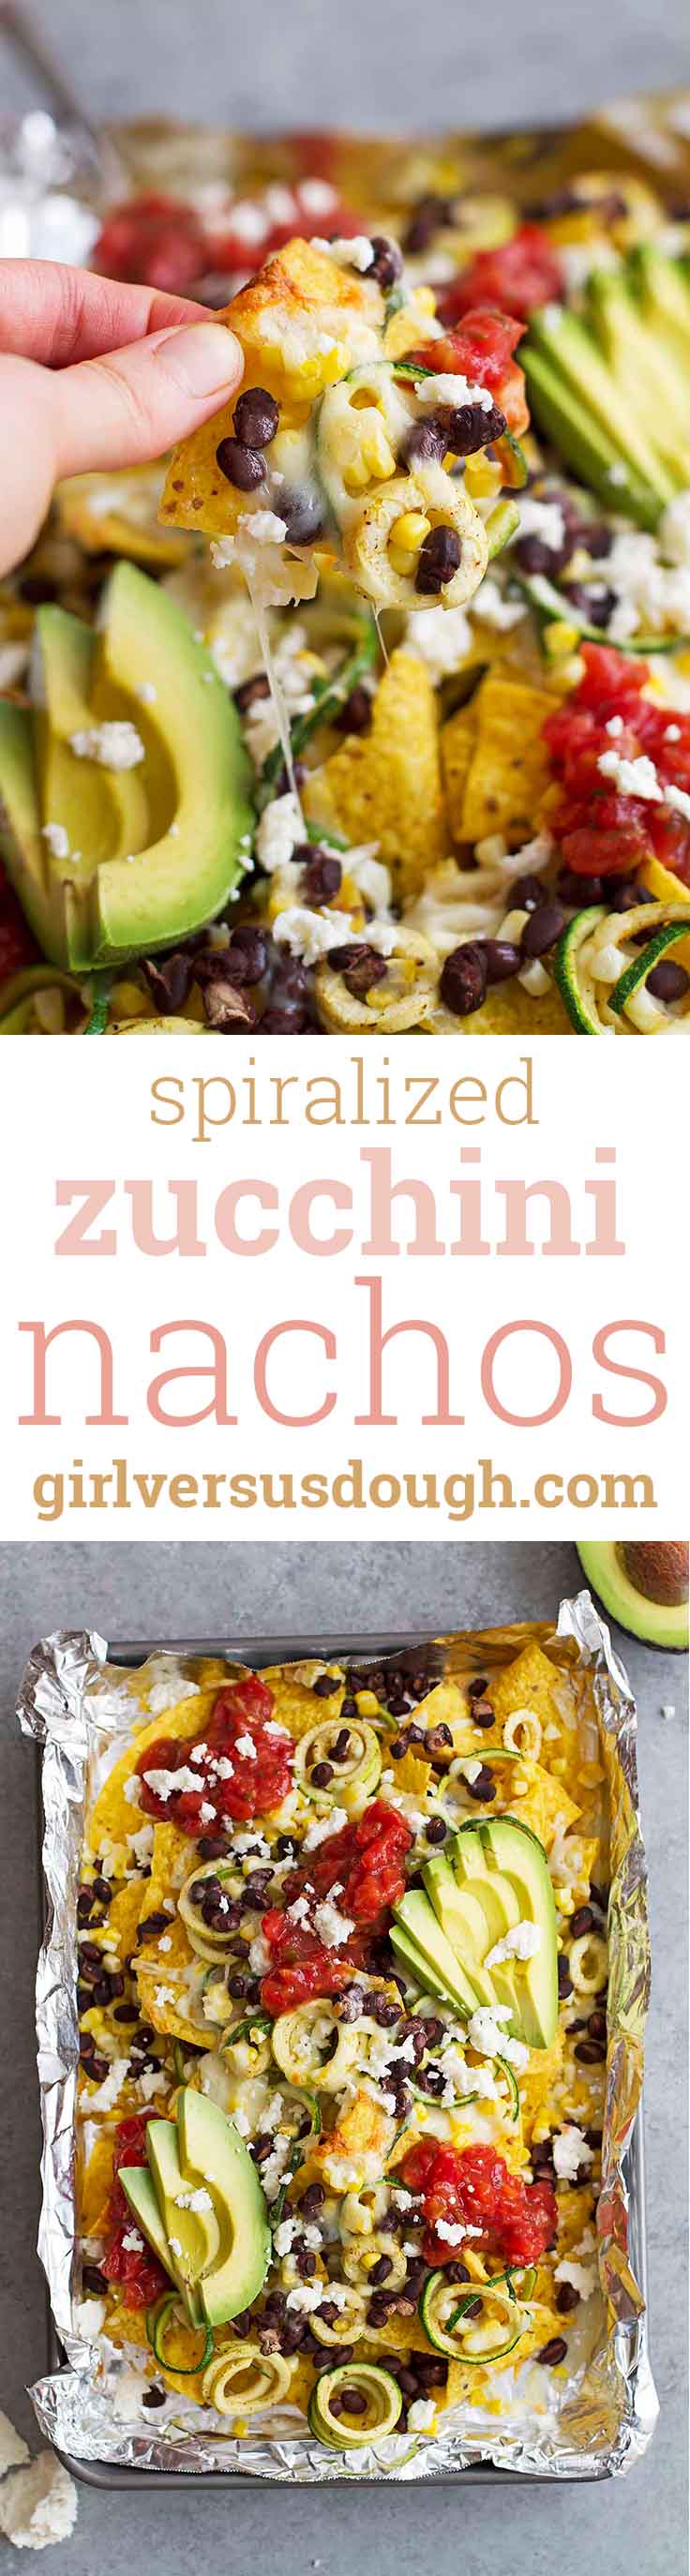 Spiralized Zucchini Nachos -- swirls of zucchini spirals with crunchy tortilla chips, melty cheese, fresh corn and black beans make these the ultimate nachos. www.girlversusdough.com @girlversusdough